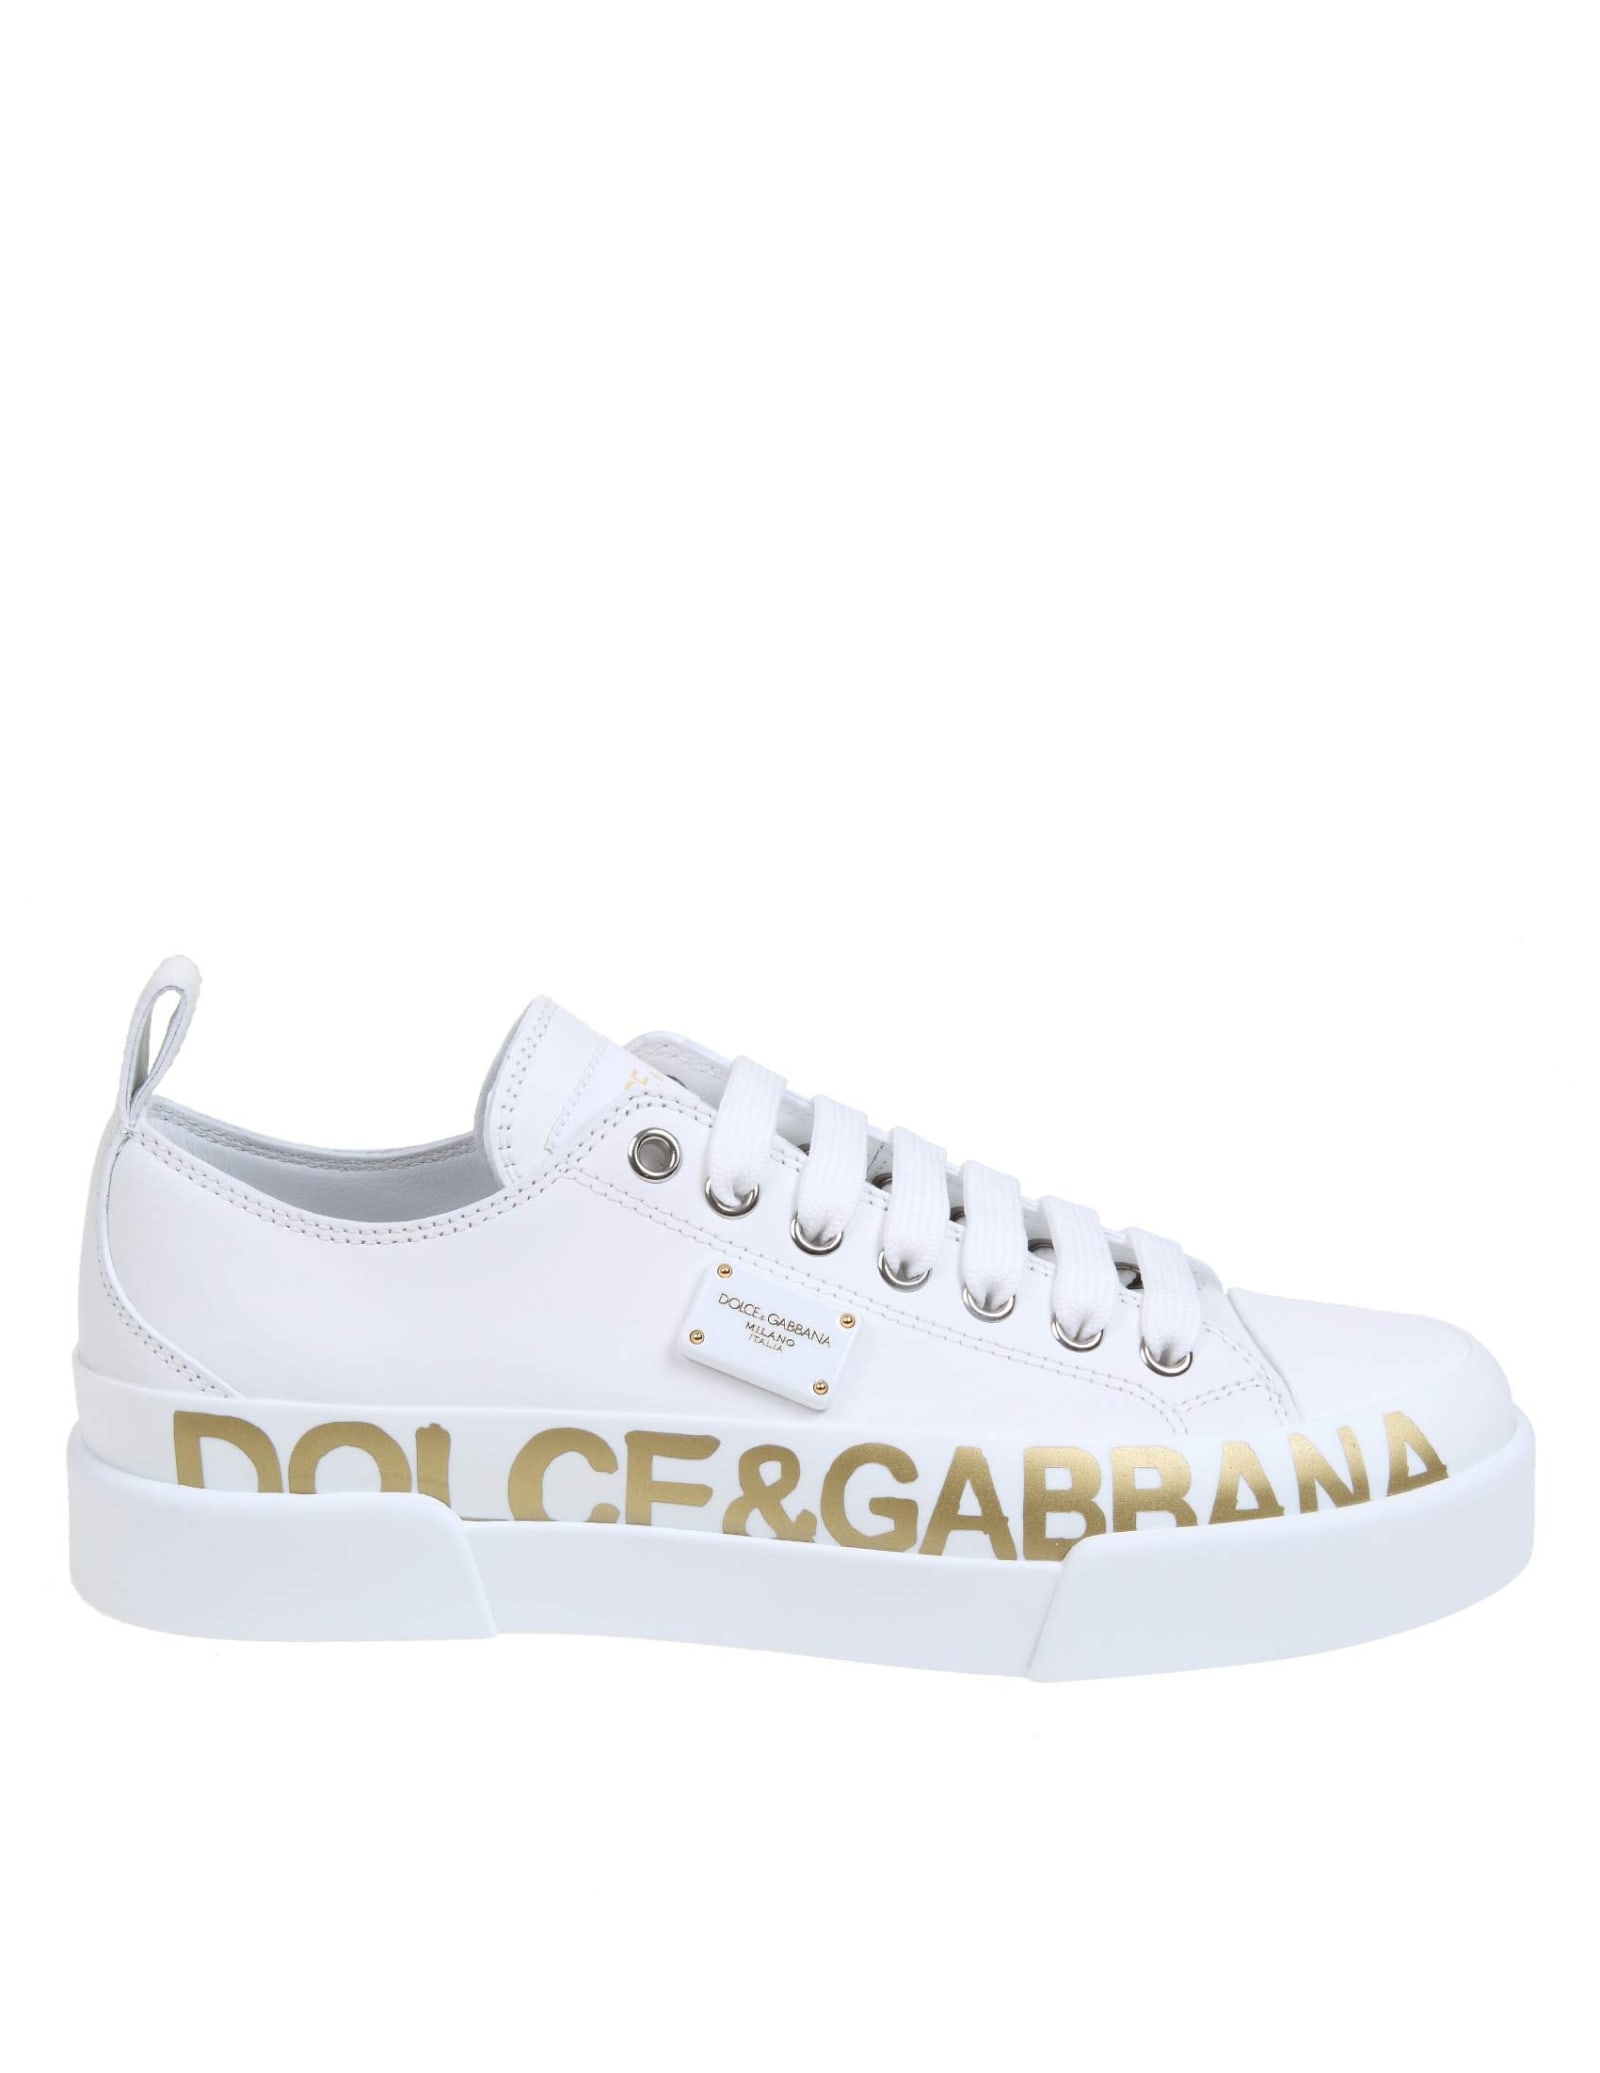 Buy Dolce & Gabbana Sneakers In White Leather With Gold Logo (price in ...